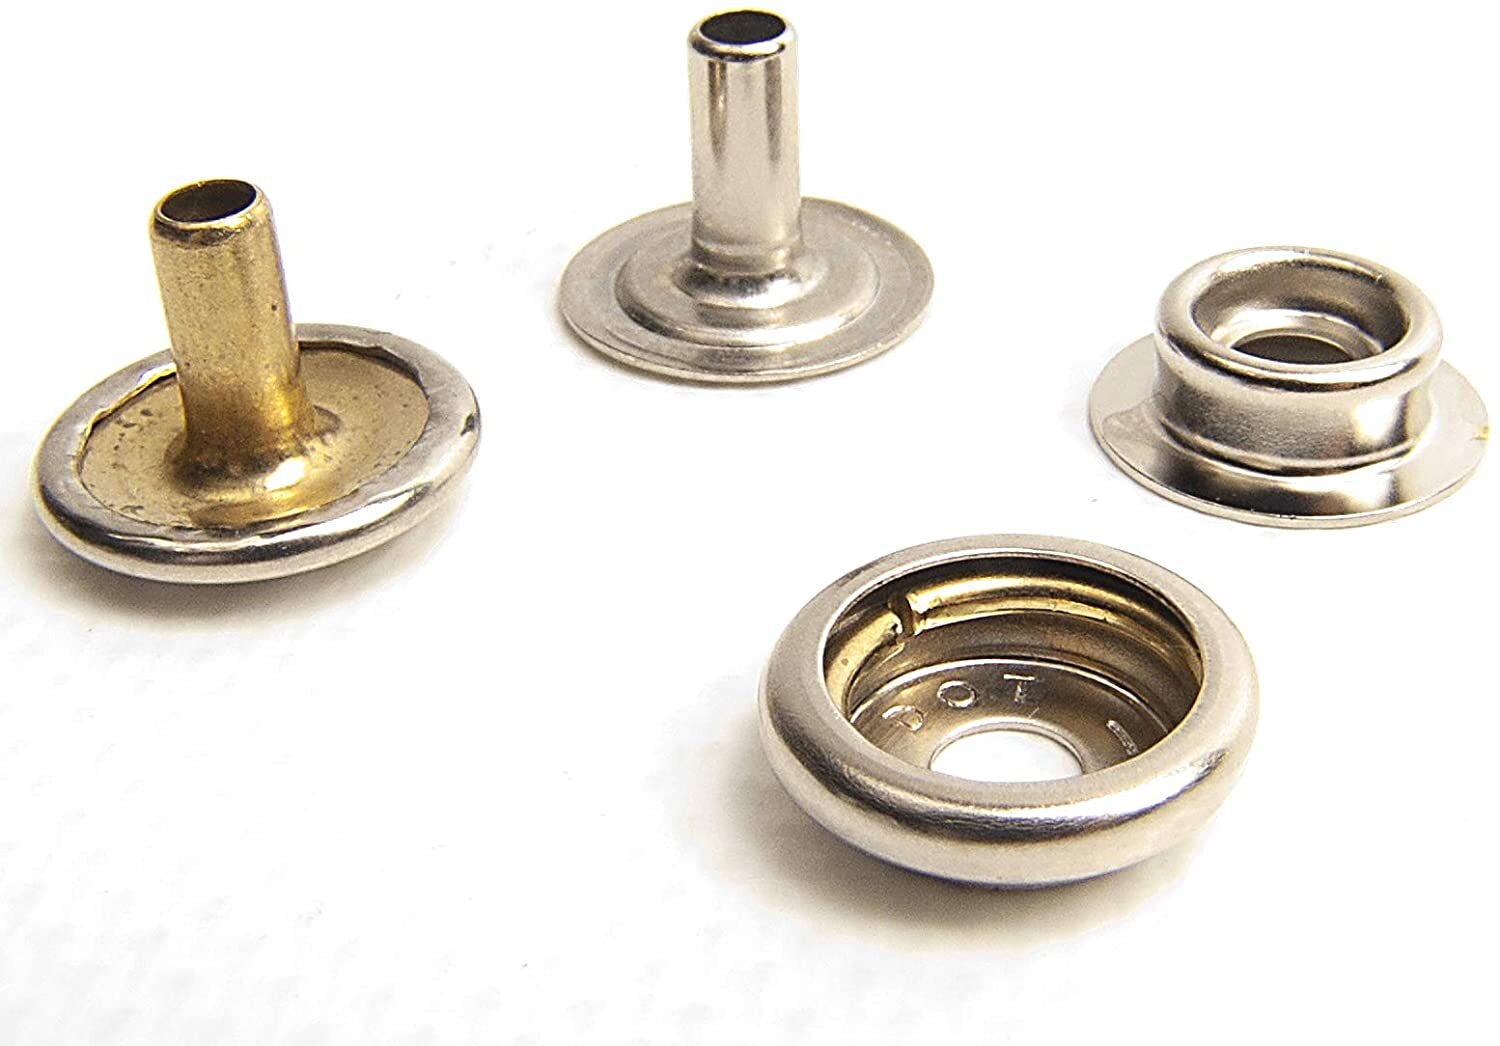 DOT® Snap Fastener Cloth-to-Cloth Set (Nickel-Plated Brass)